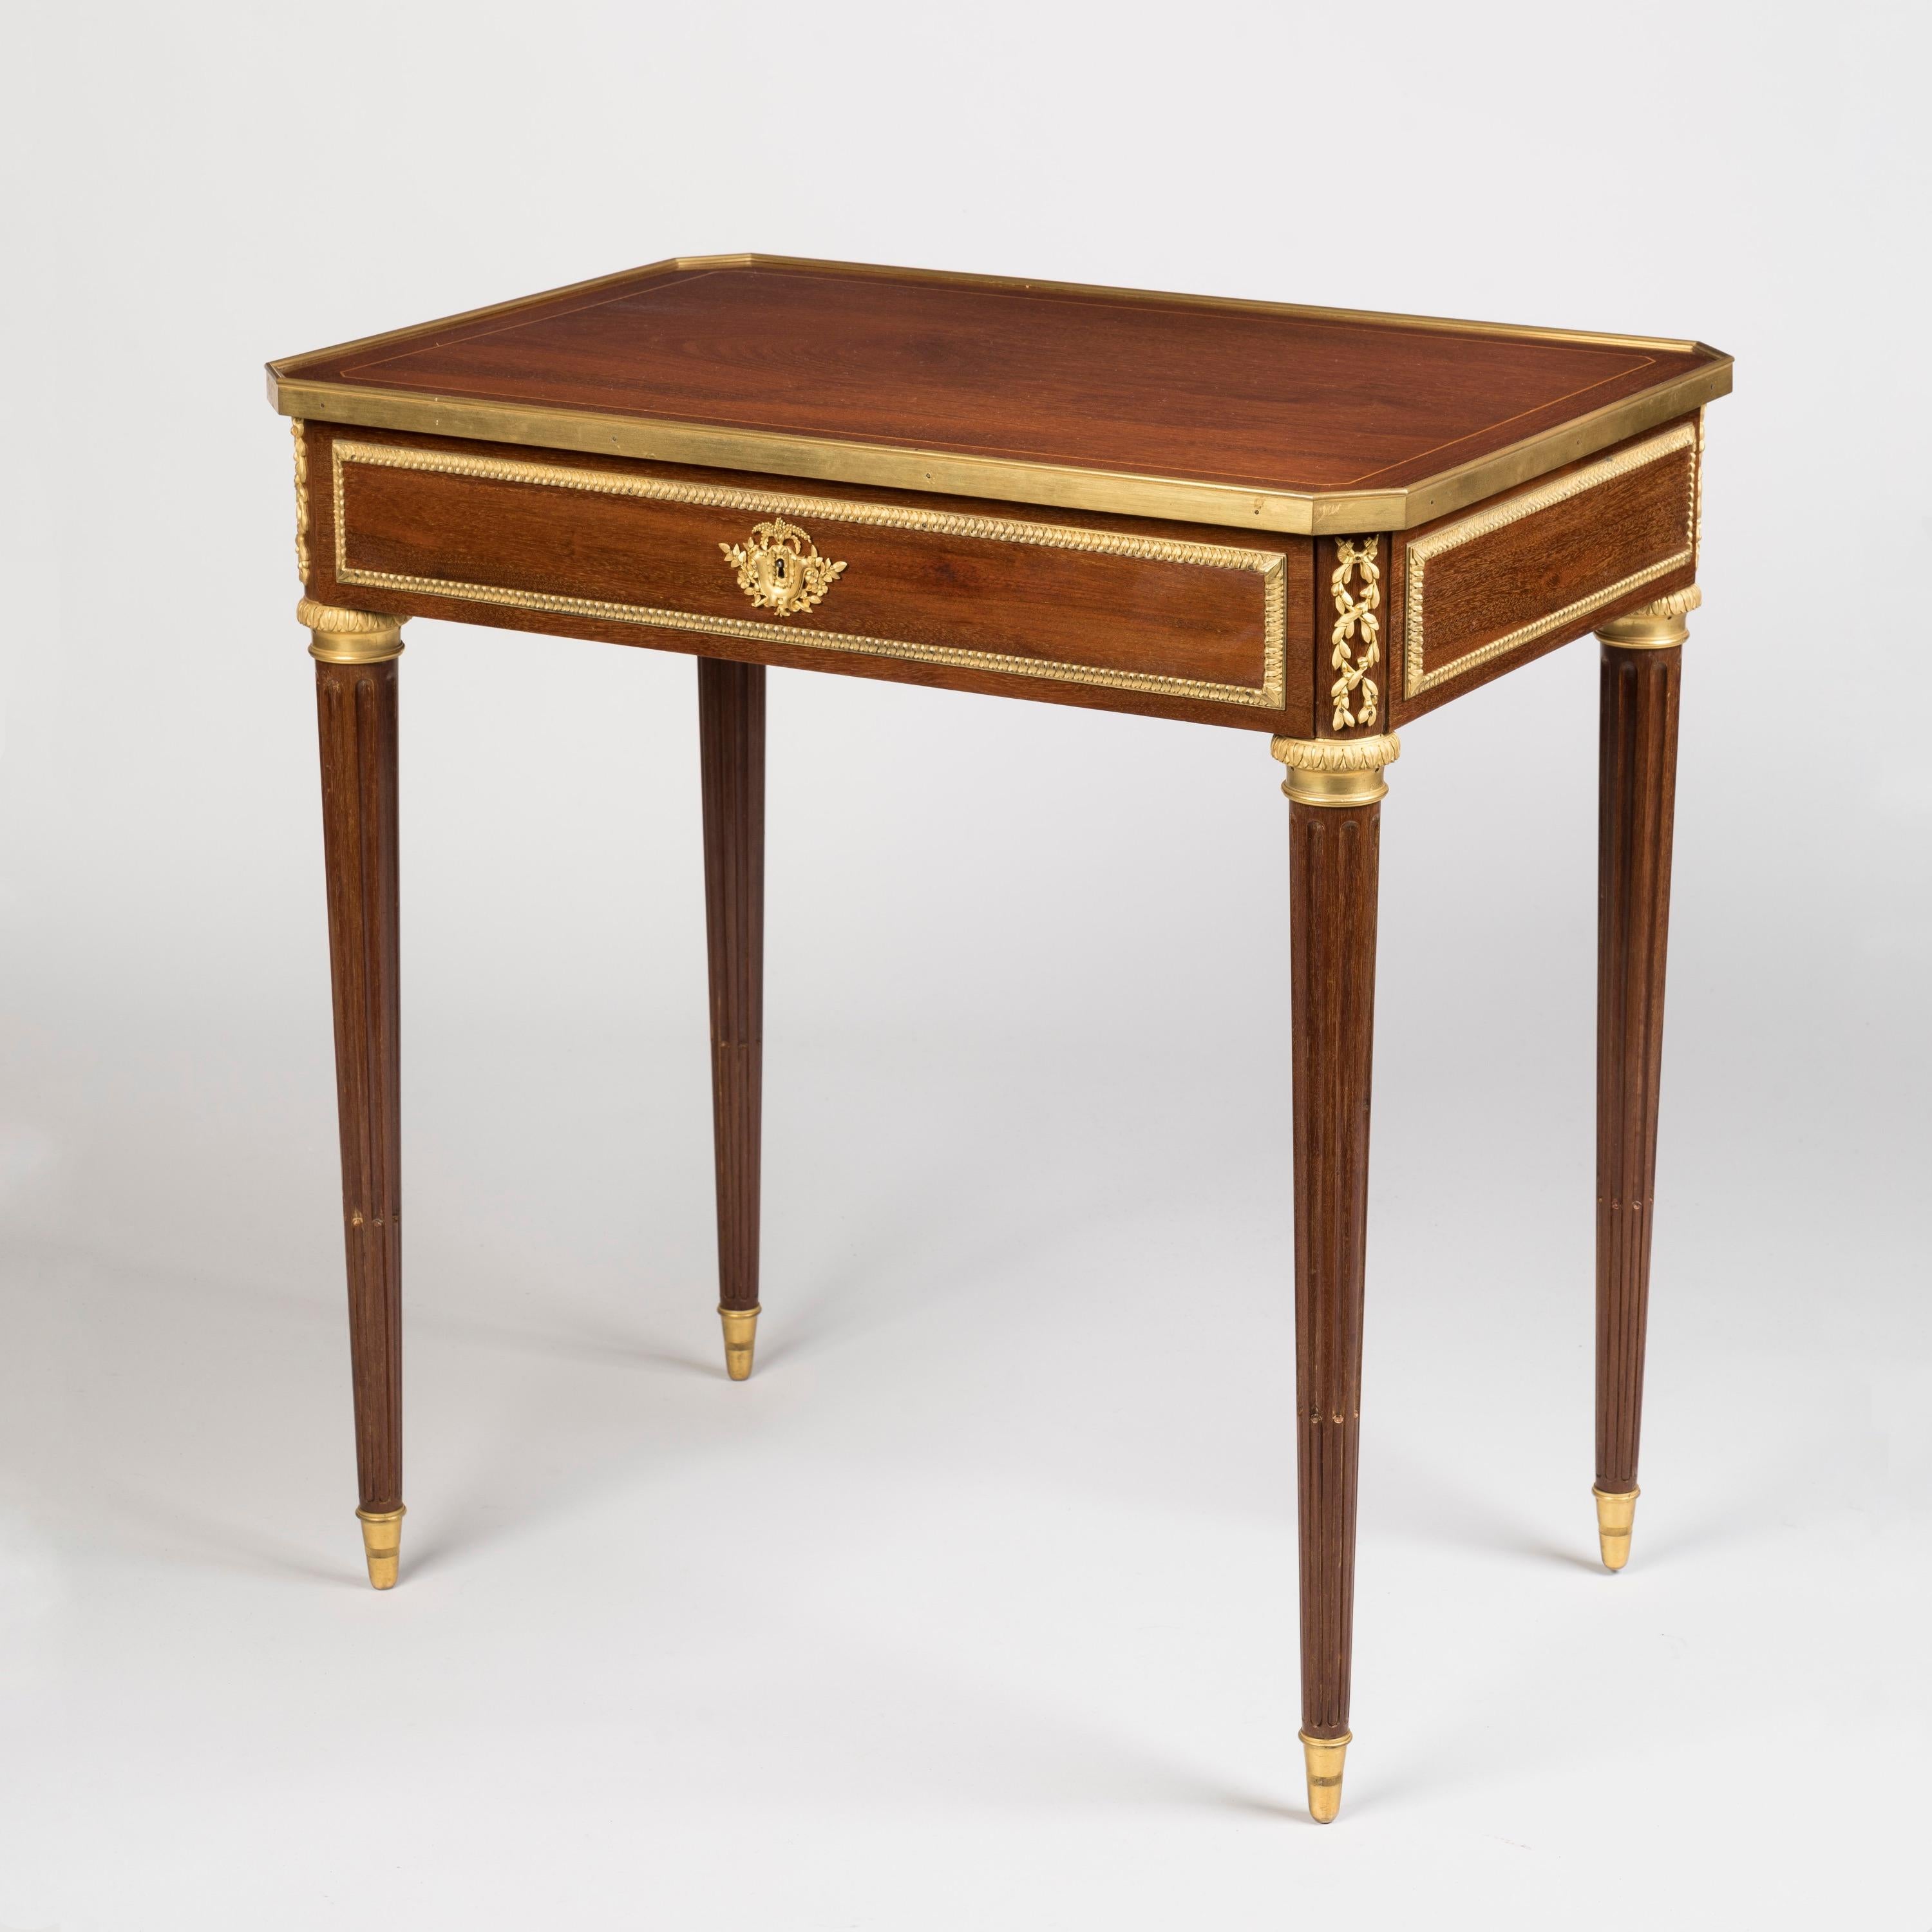 A Louis XVI style writing table
By Lexcellent of Paris

Of restrained elegance and sumptuous finish with gilt bronze mounts, the mahogany-veneered writing table supported on tapering stop-fluted legs with bronze sabots and capitals, the writing